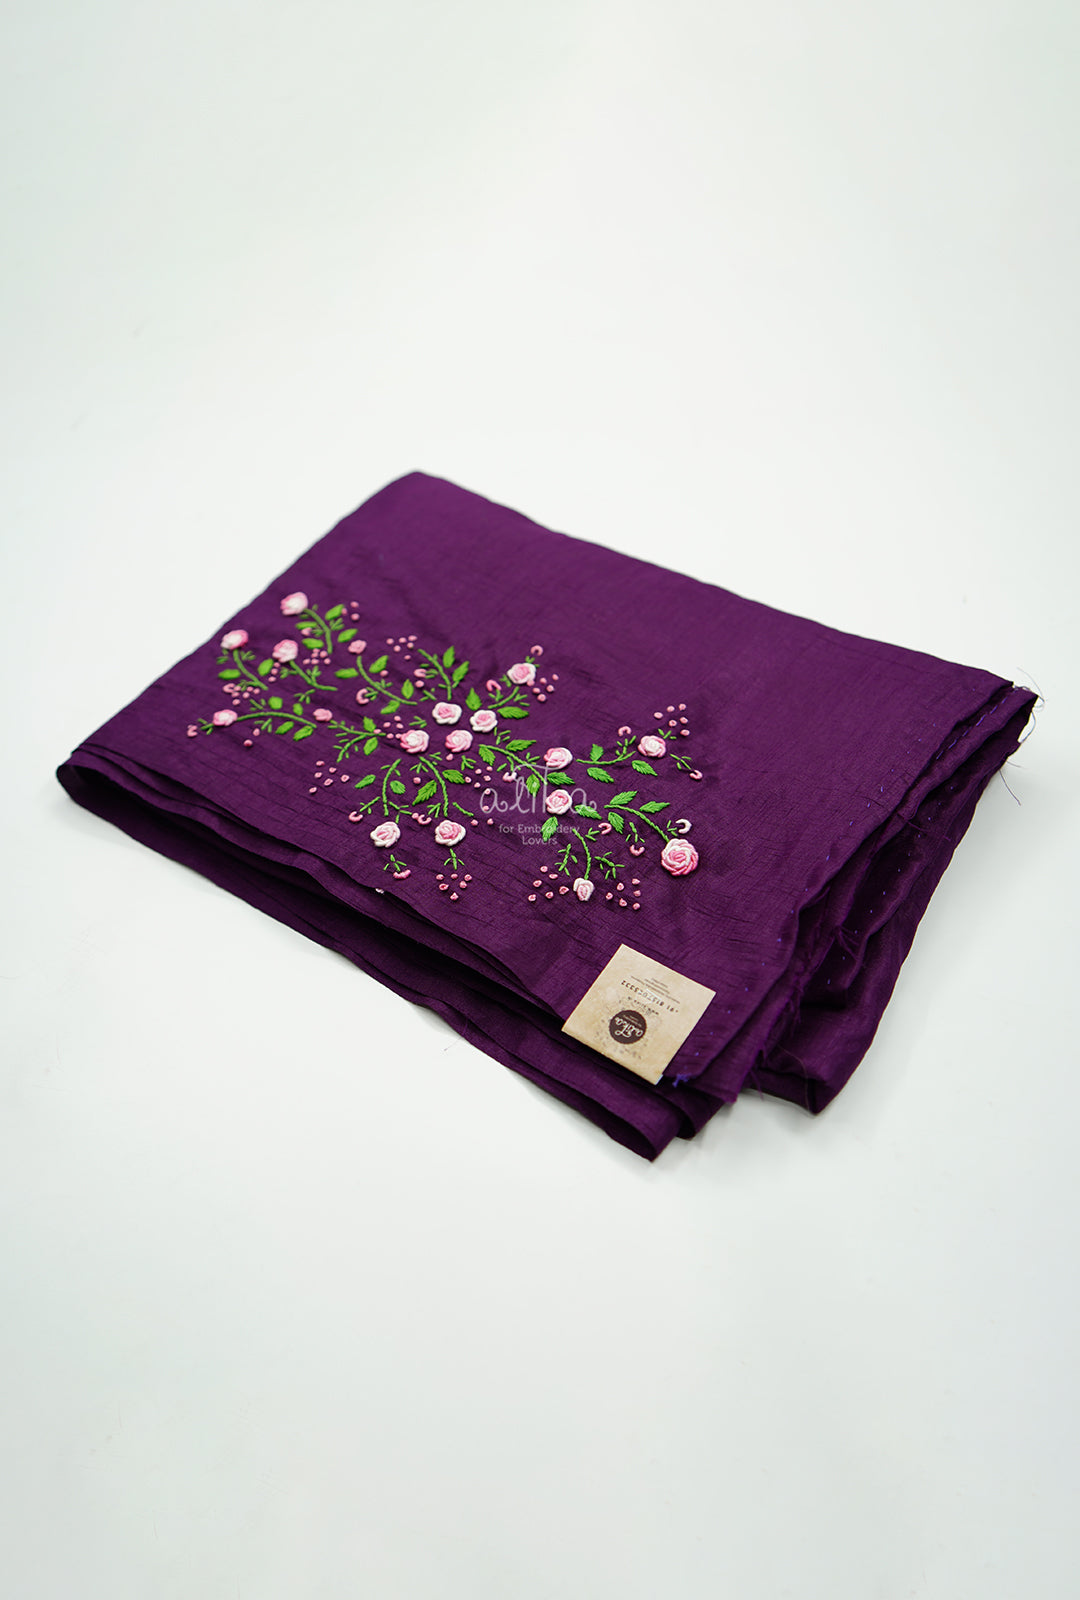 SOFT  SILK  PURPLE  SAREE  WITH DOBLE SHADED  PINK BULLION EMBROIDERY